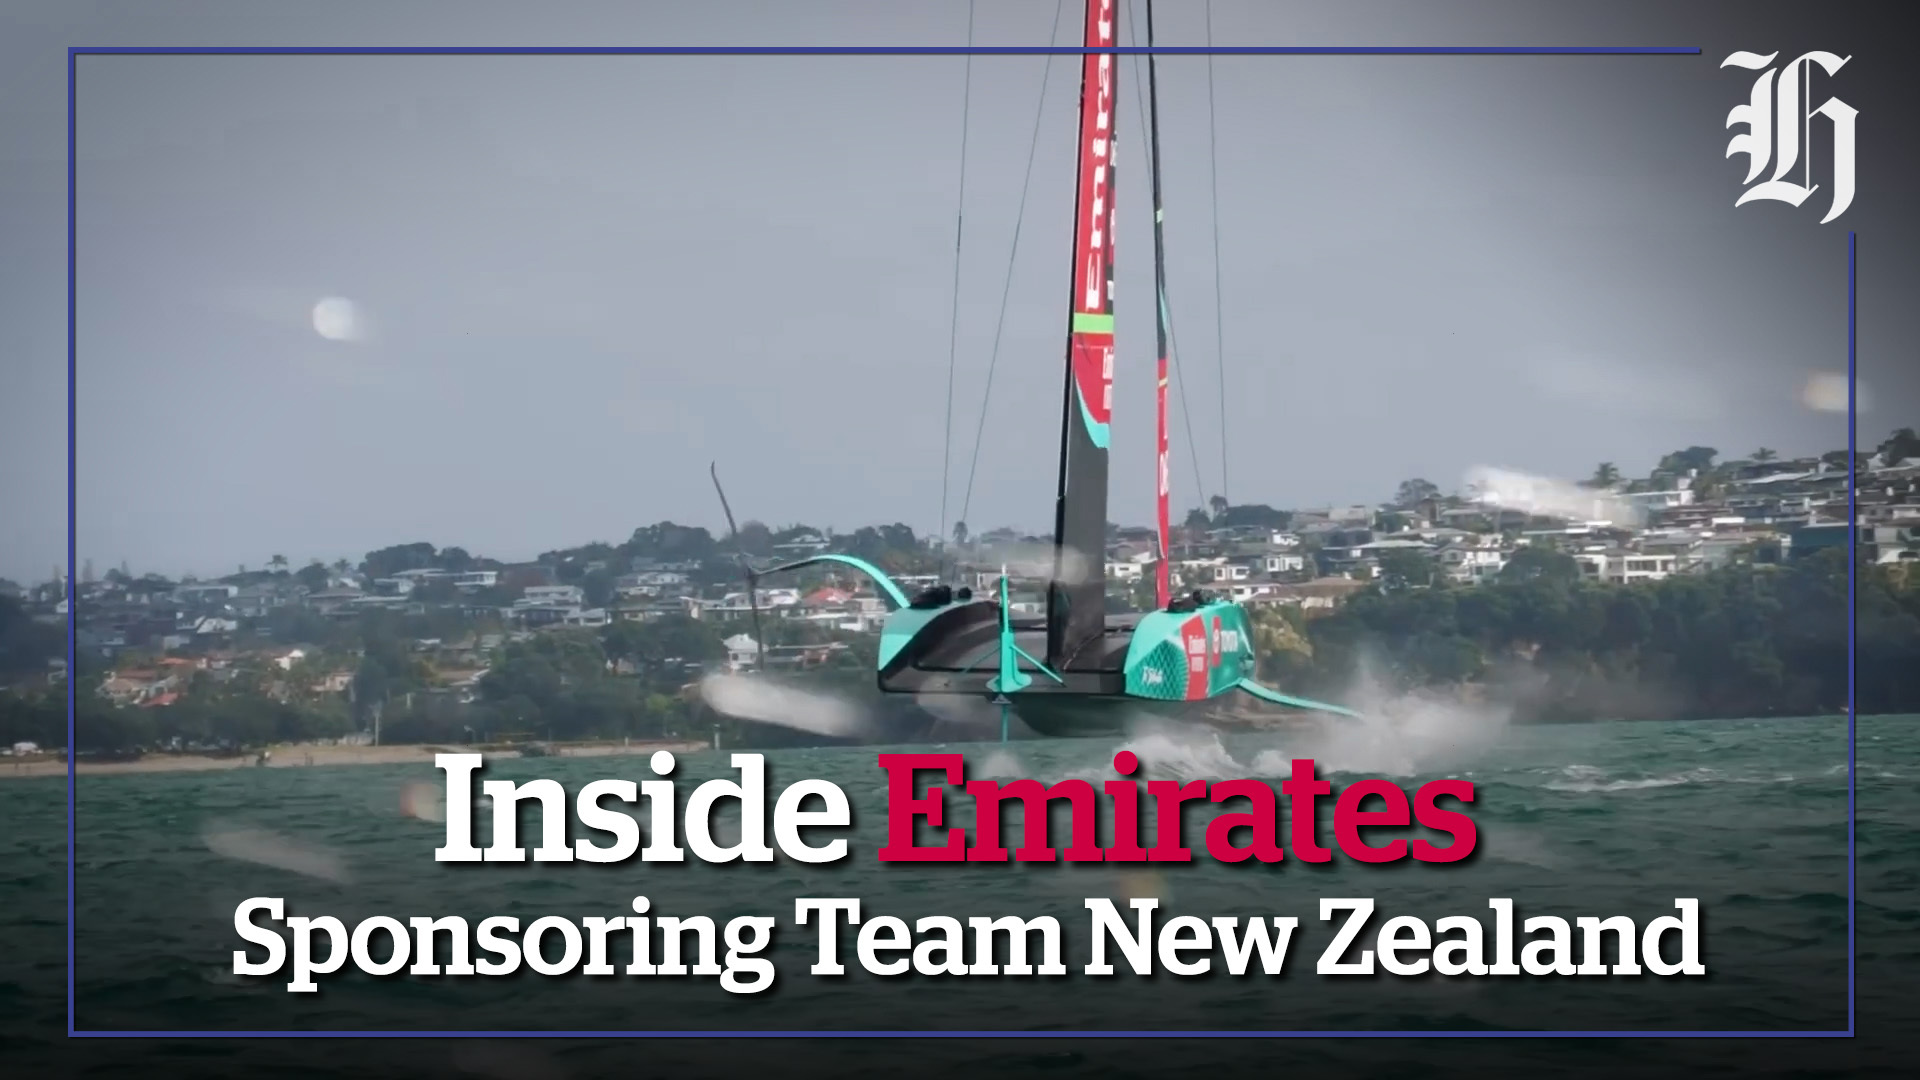 News about maxon - maxon is cheering for Emirates Team NZ